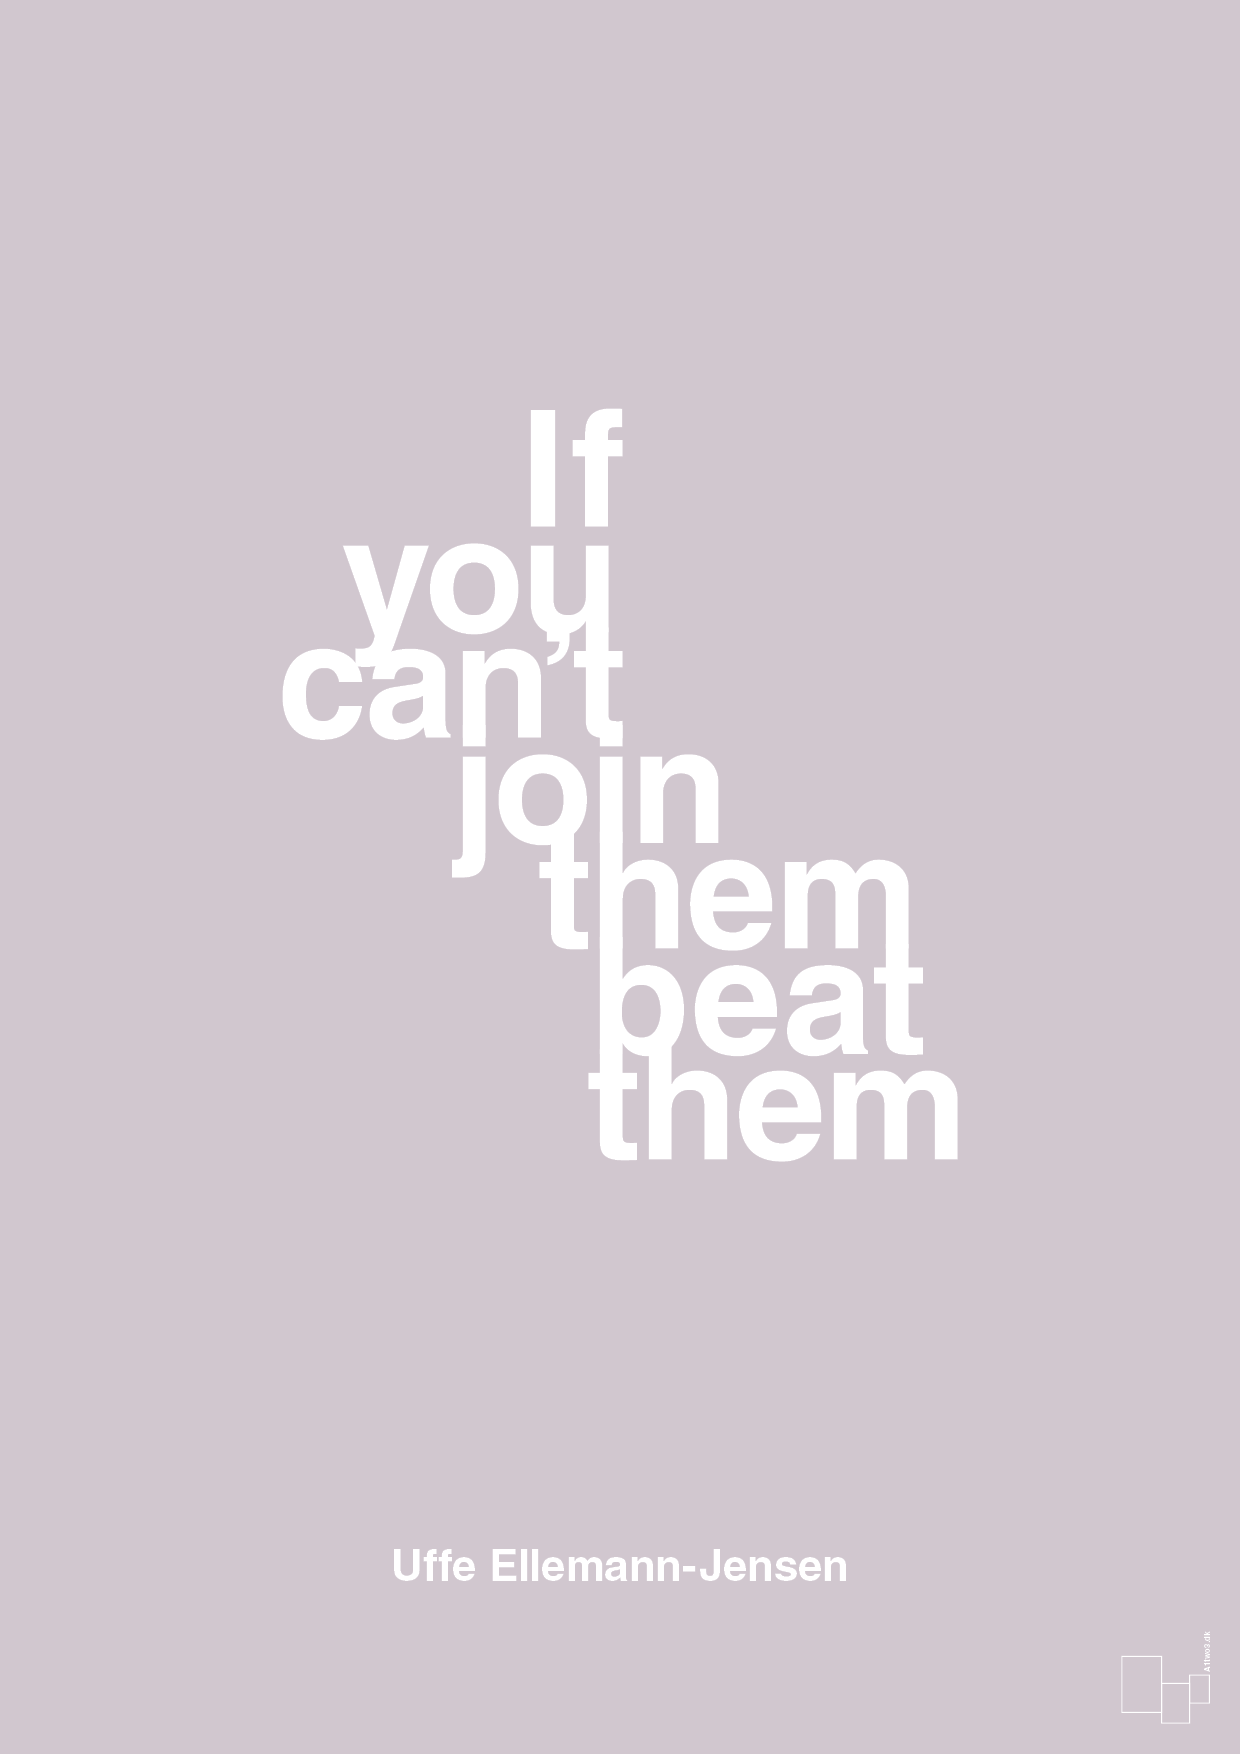 if you cant join them beat them - Plakat med Citater i Dusty Lilac